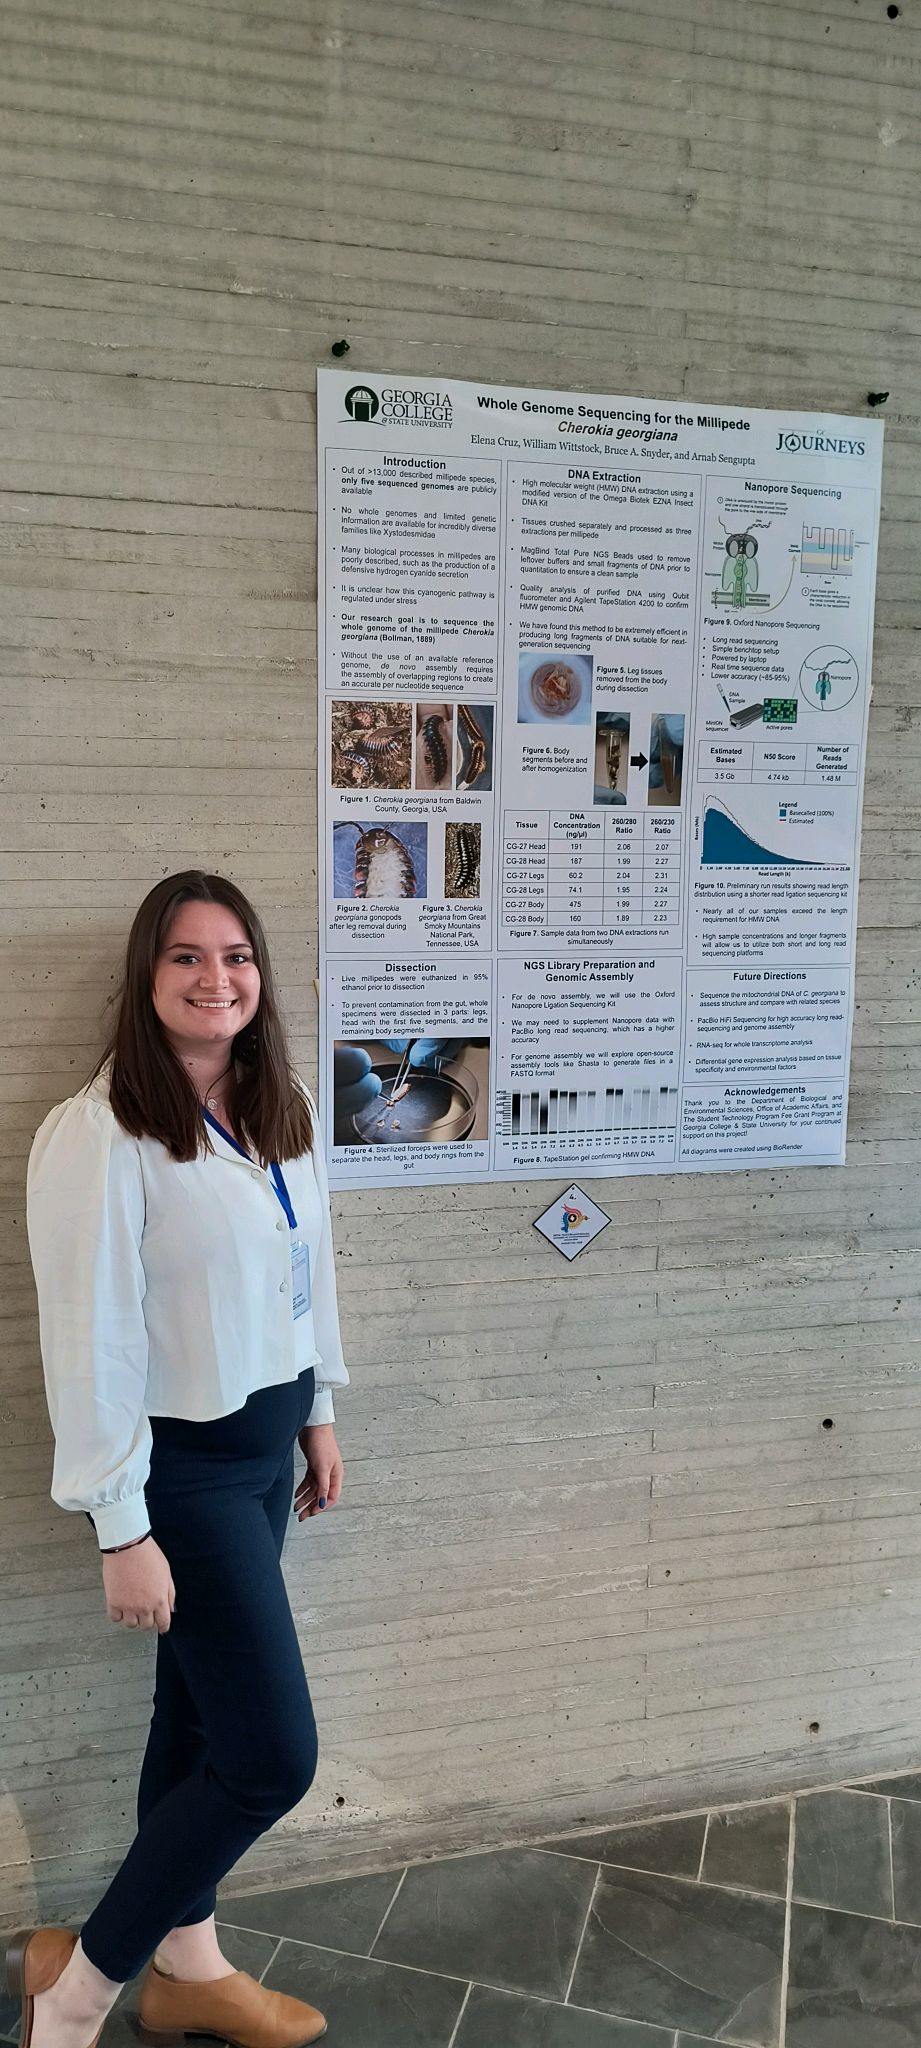 Elena Cruz at her research poster in Colombia.